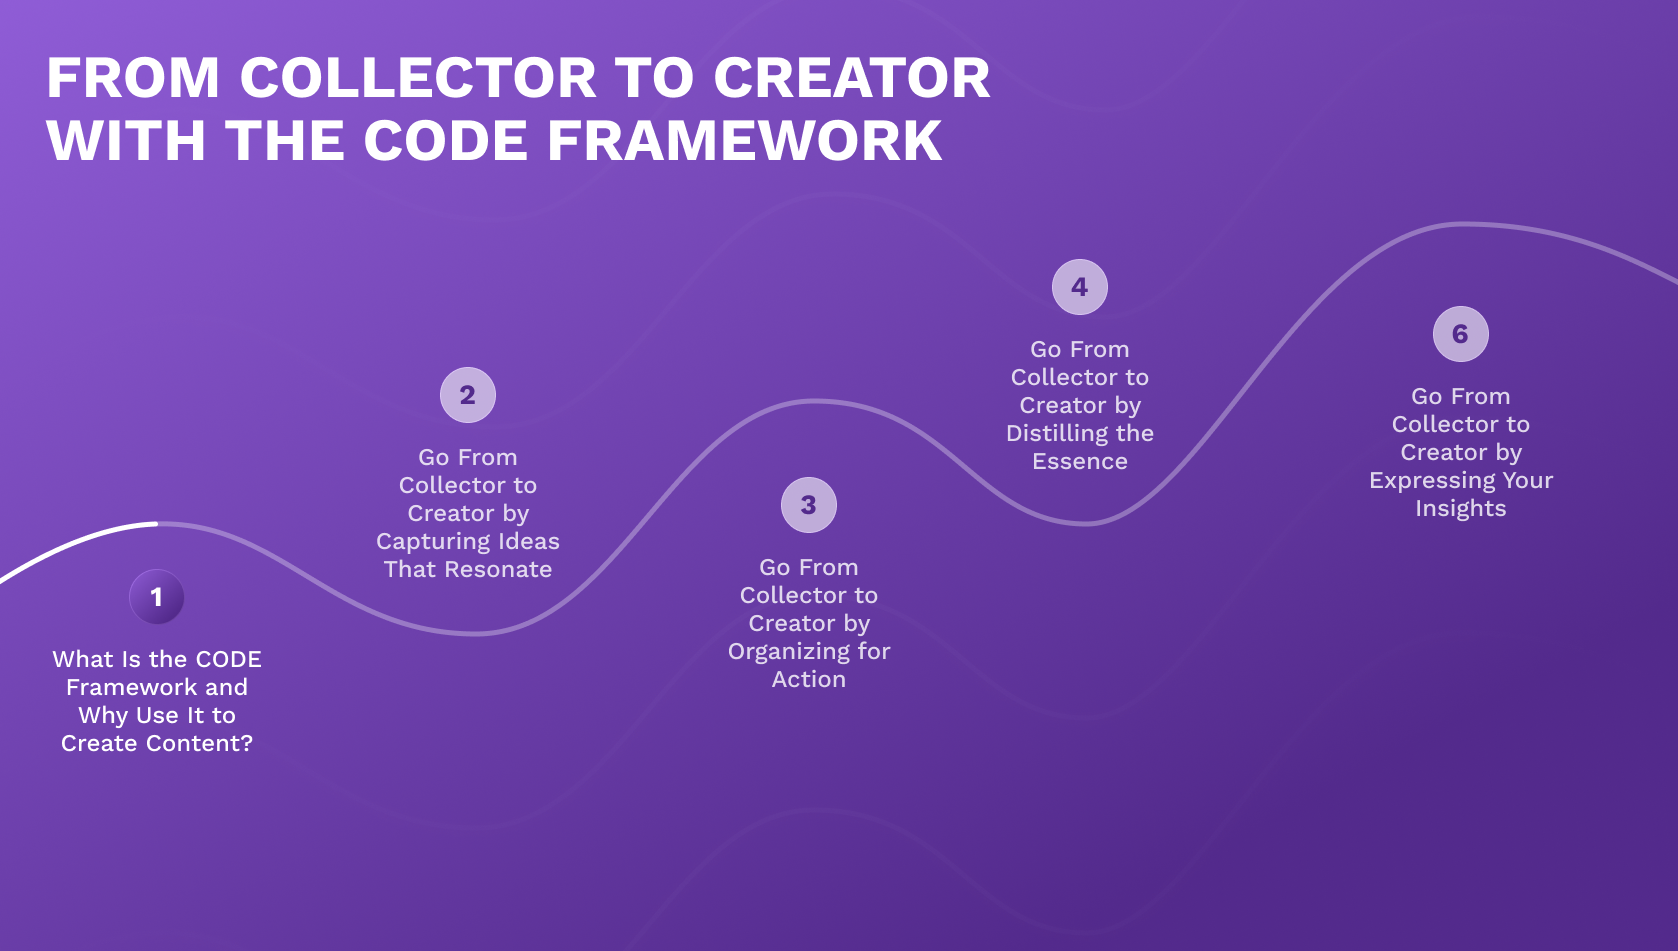 What Is the CODE Framework and Why Use It to Create Content?